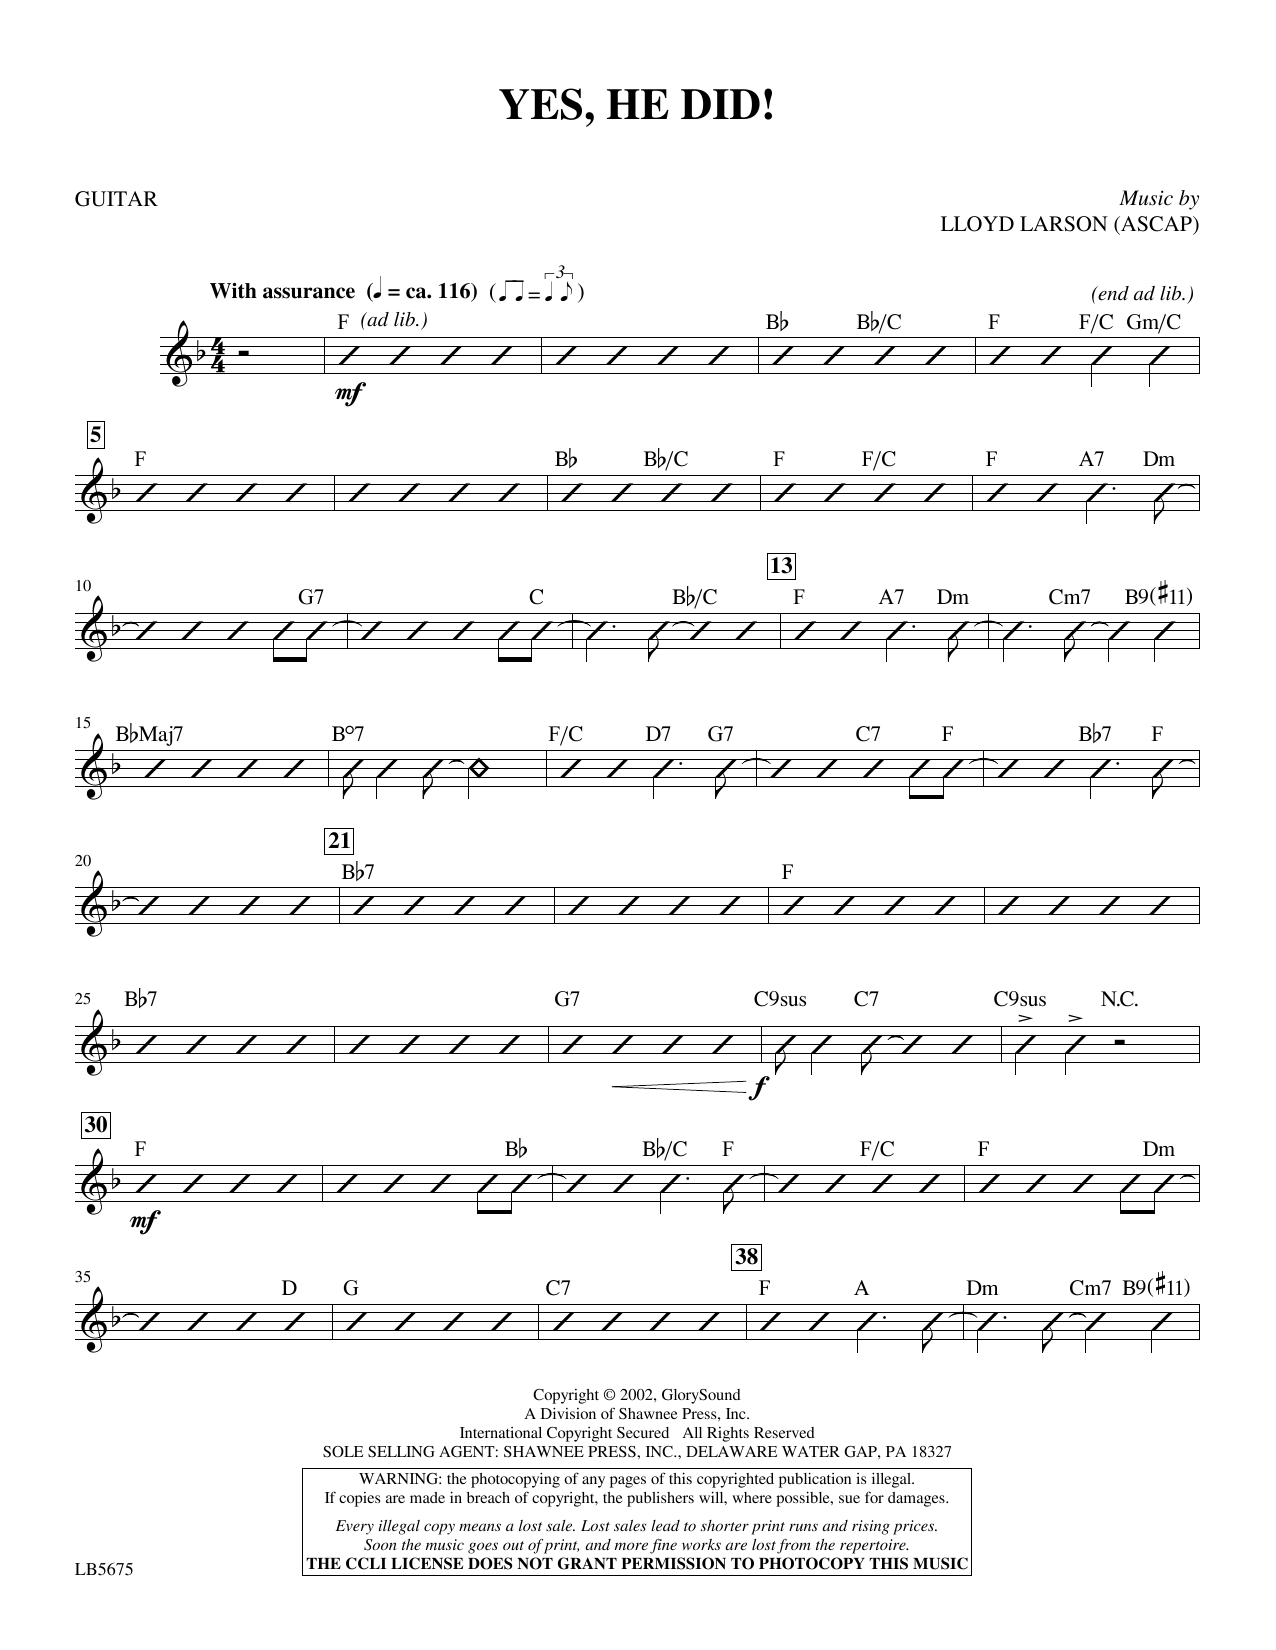 J. Paul Williams Yes, He Did! - Guitar sheet music notes and chords. Download Printable PDF.